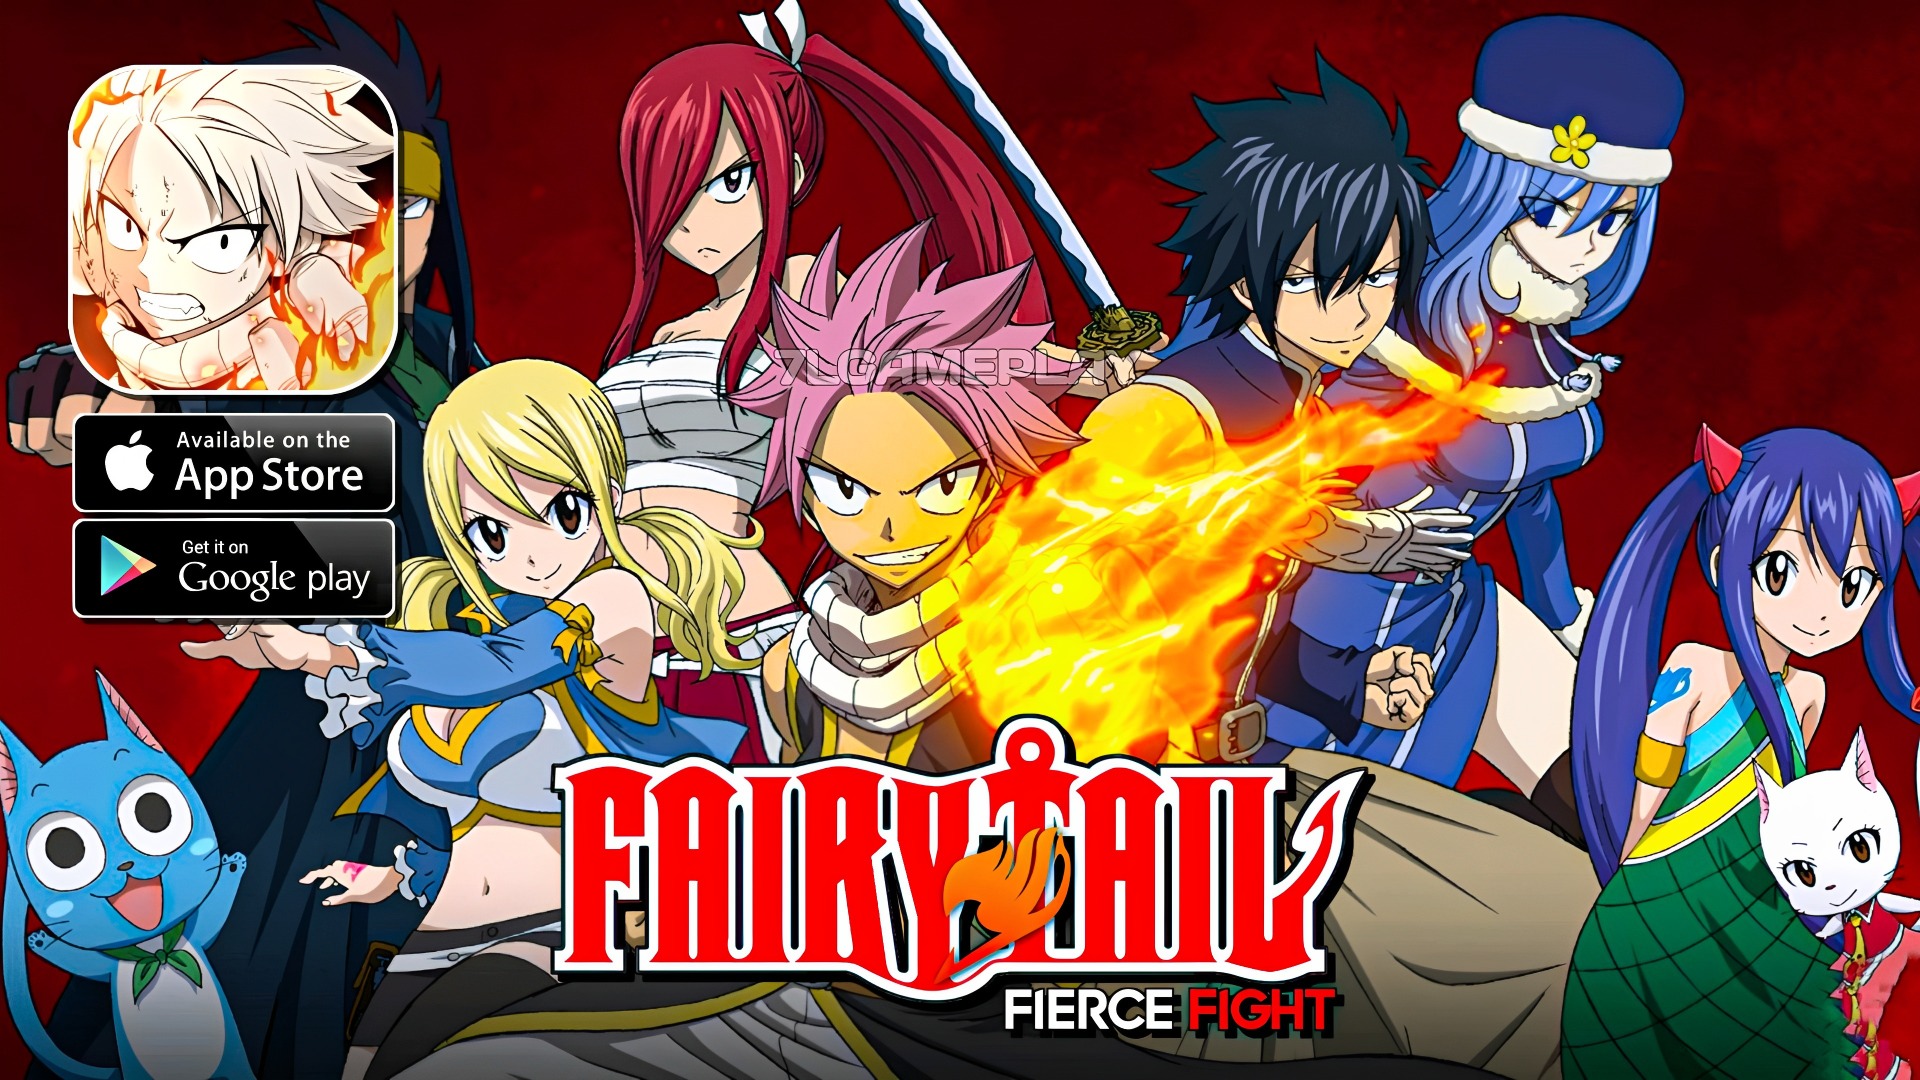 Fairy Tail: The Great Journey - Games